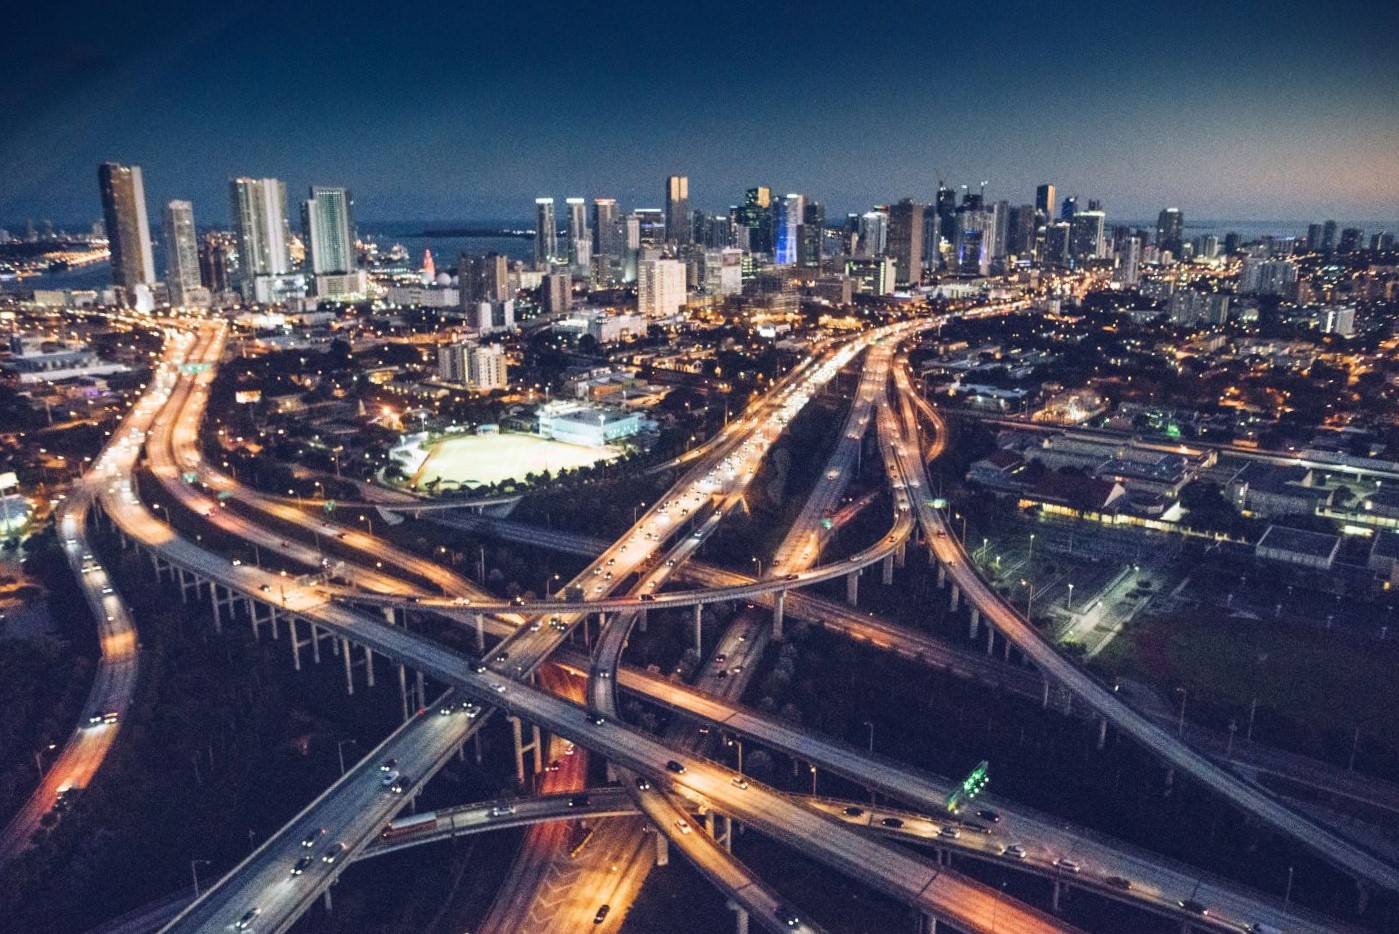 Miami, USA, has more than 500,000 smart light poles, all connected to the grid. The project ensured significant energy savings (-44%)